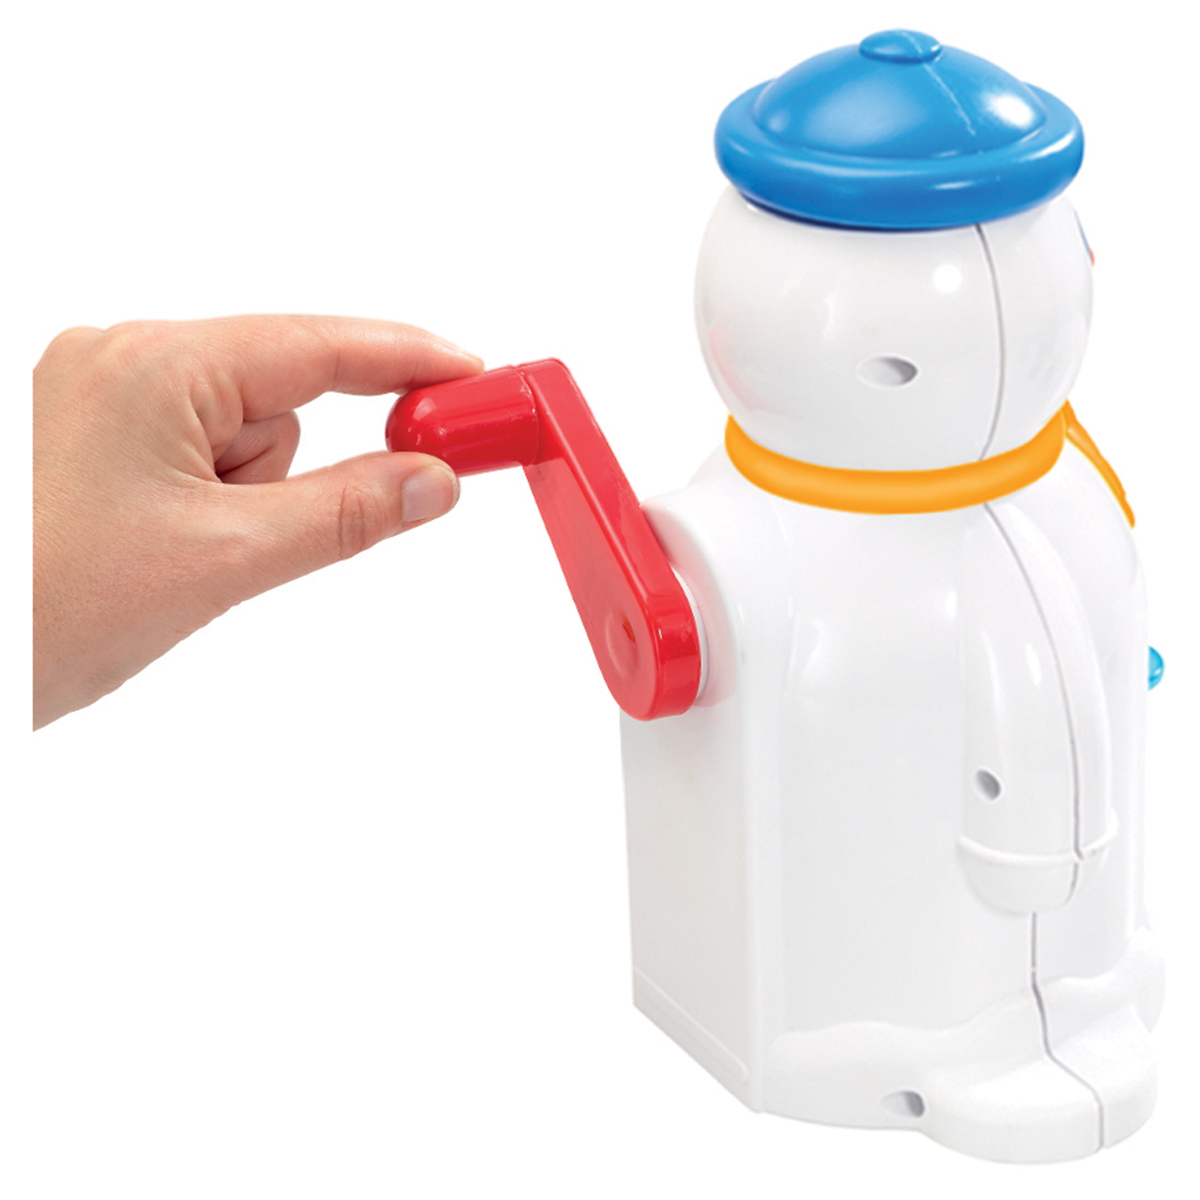 Reviewing The Original Mr Frosty The Ice Crunchy Maker